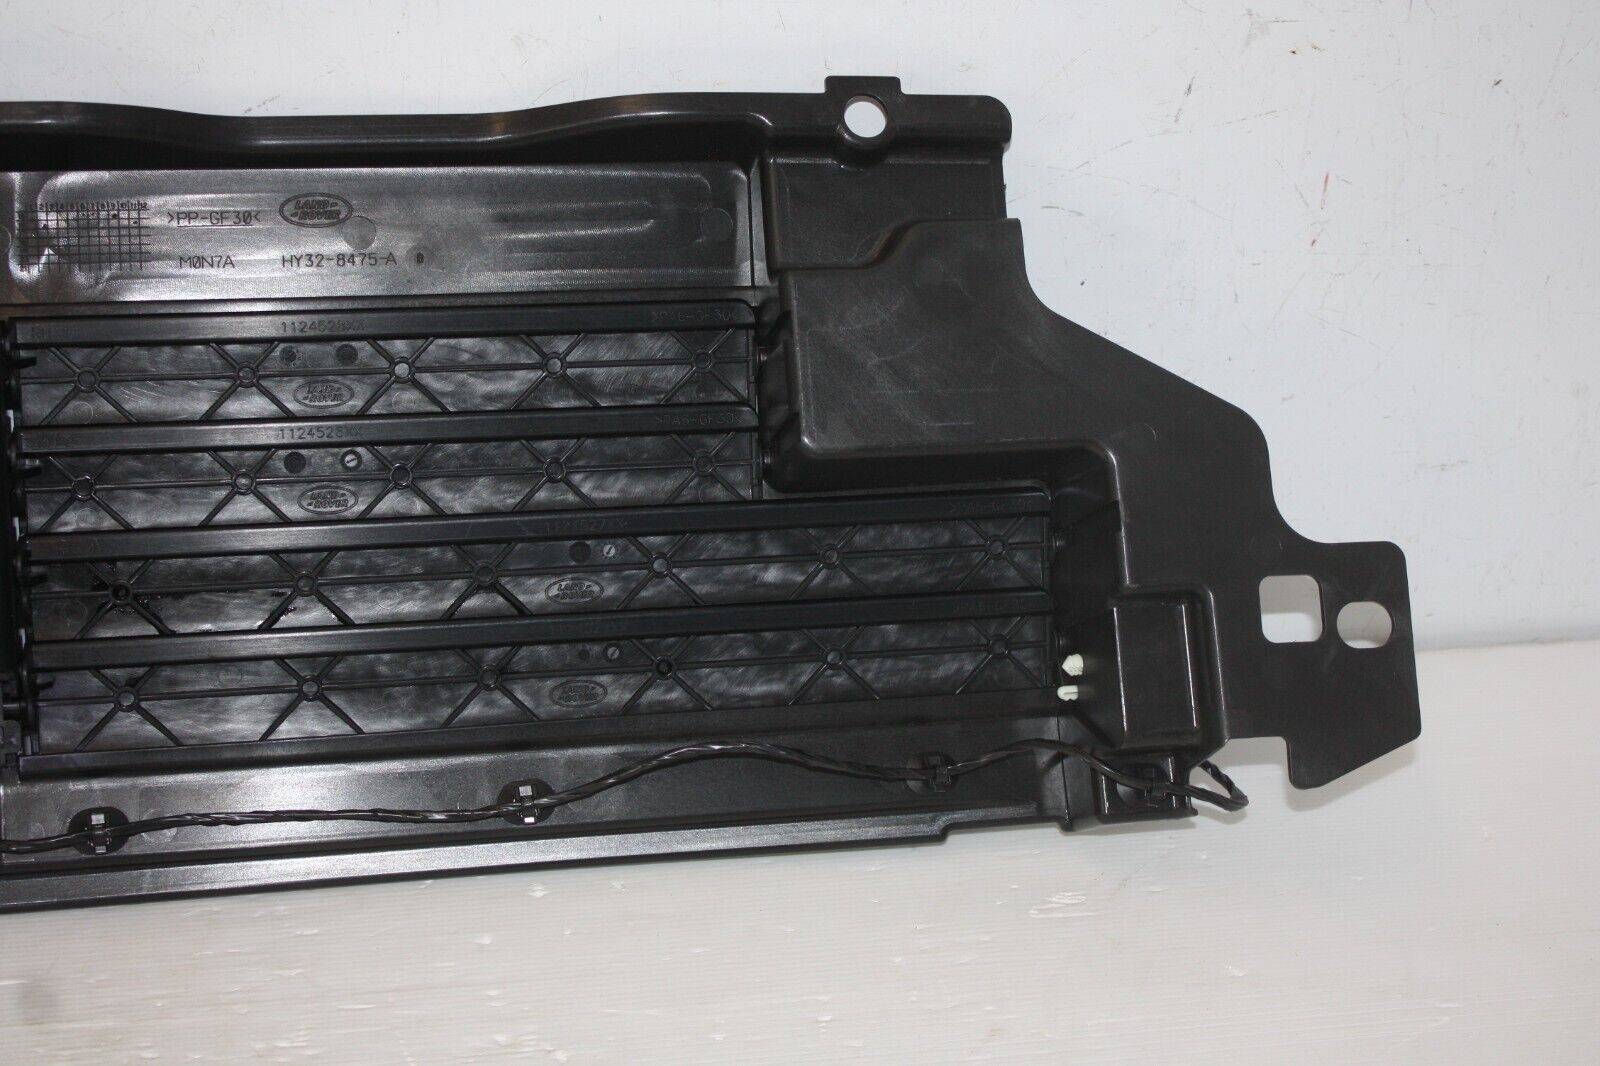 Land-Rover-Discovery-L462-Radiator-Shutter-2017-ON-HY32-8475-A-Genuine-175522220398-4